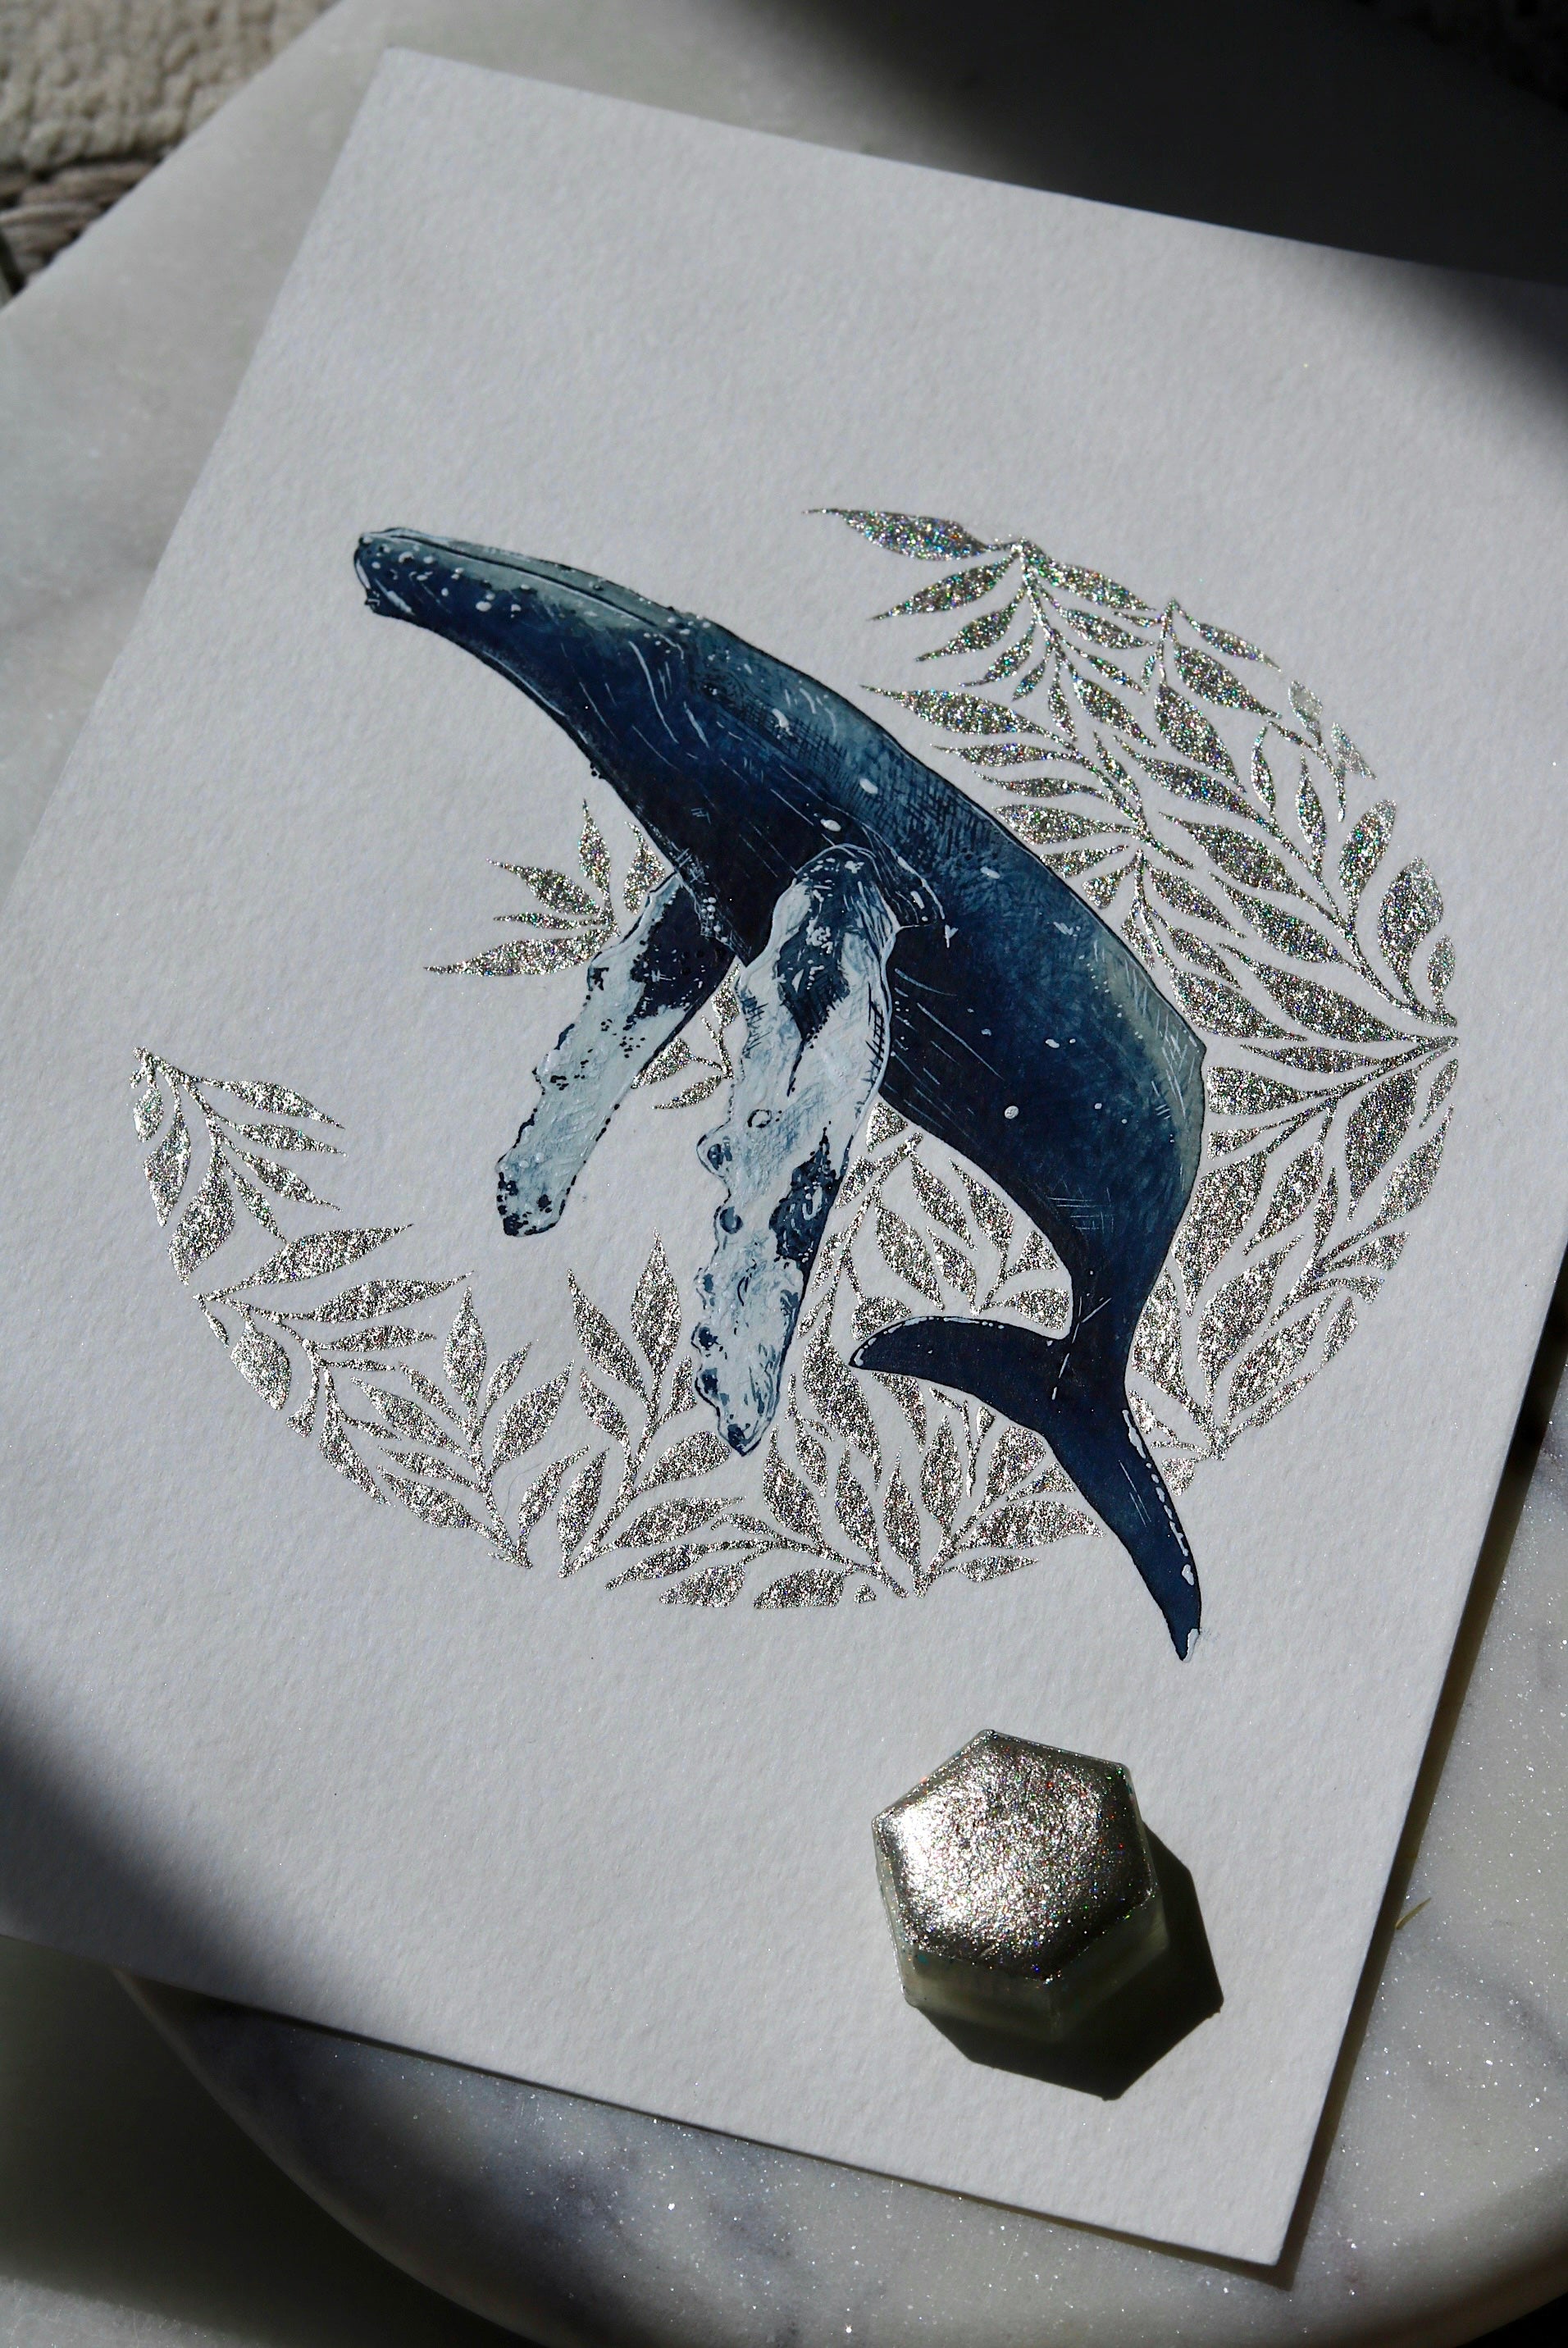 Brighten up your artwork with handmade metallic watercolors! Featuring  here: Handmade Metallic Watercolors with extreme sparkle : u/Lisilinka